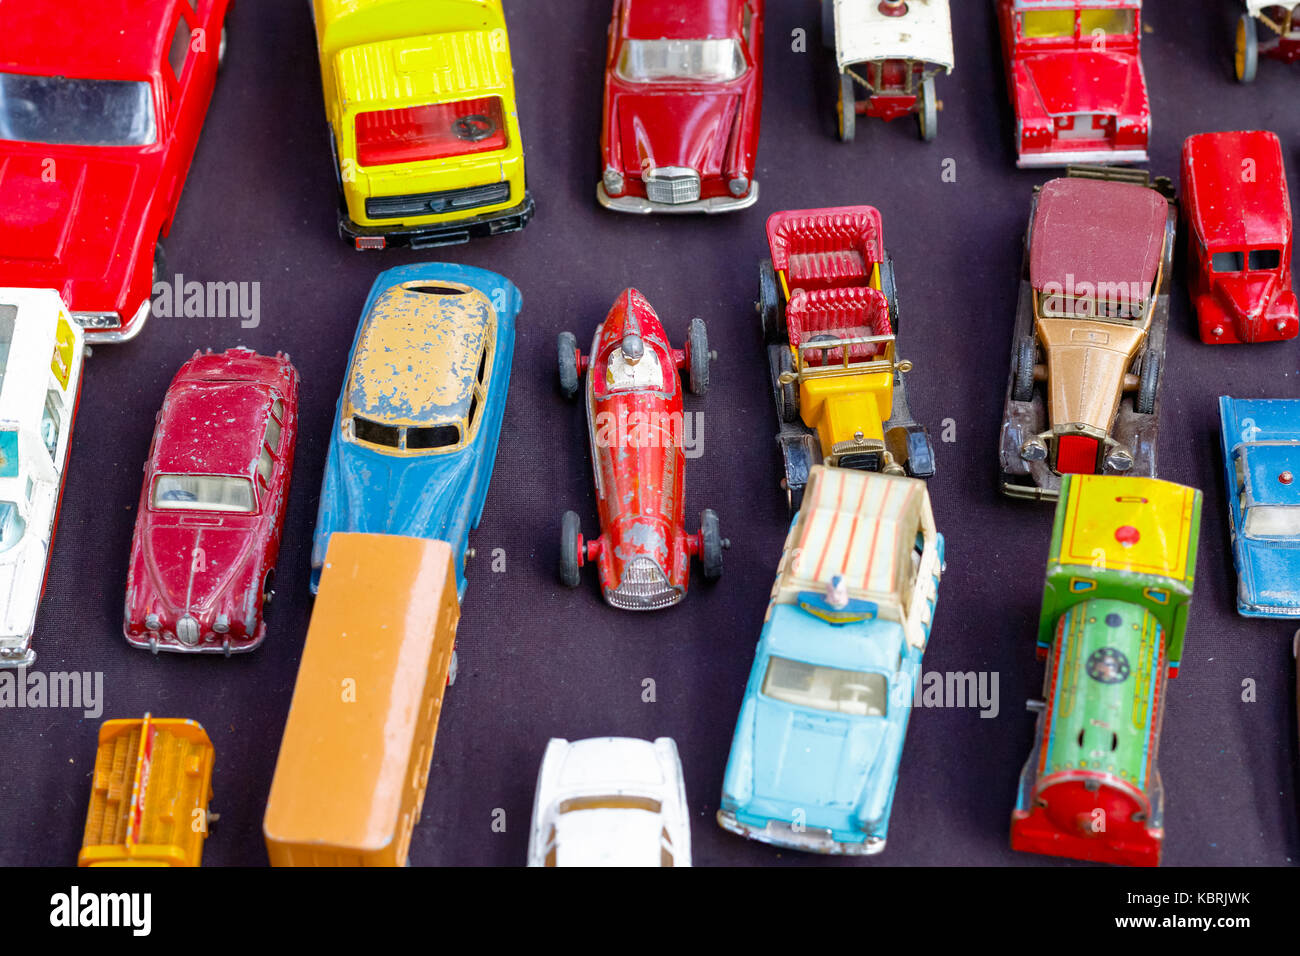 Old toy cars displayed at a junk shop in Old Spitalfields Market in London Stock Photo